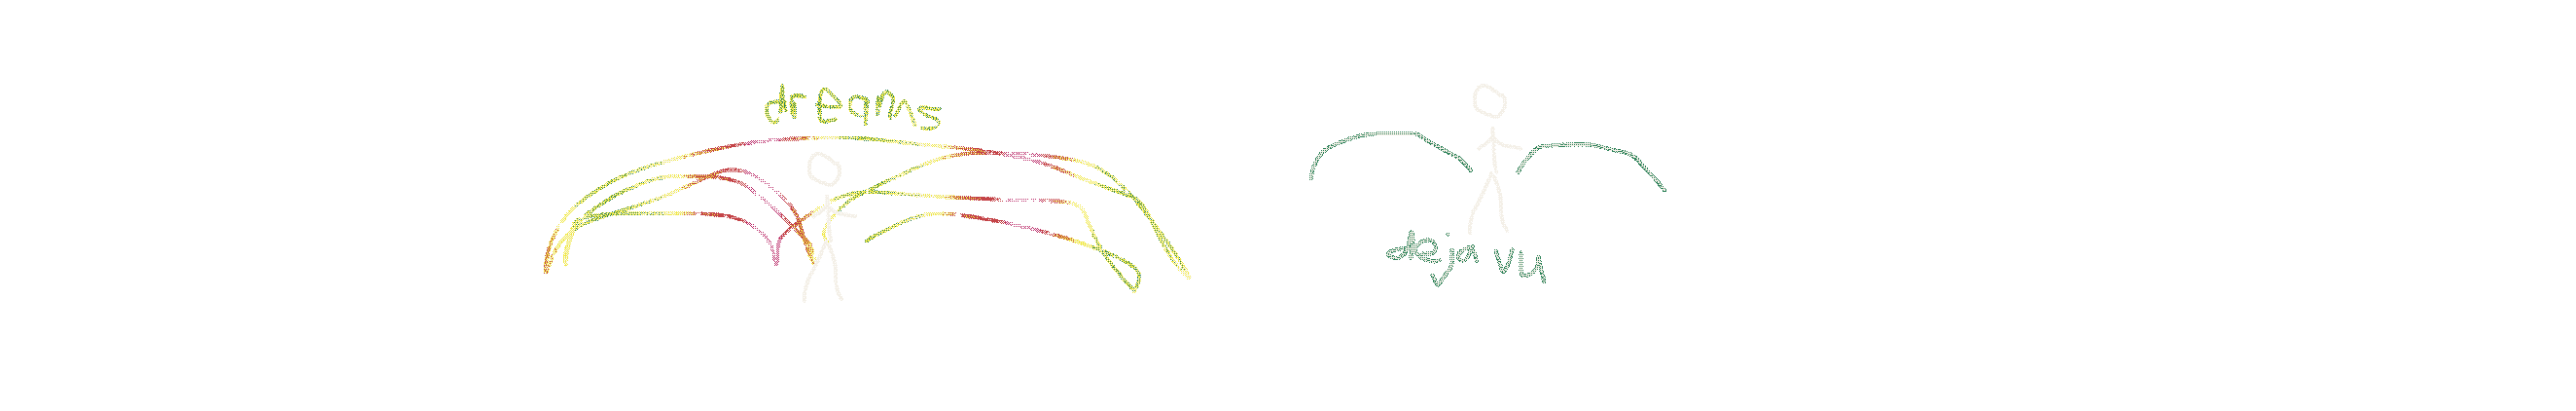 A pair of drawings. On the left, a stick figure with many multicolored arcs forward and backward coming from a white stick figure in the center, with dreams written above. On the right, an arc forward and an arc backward from a white stick figure in the center, with deja vu written above.